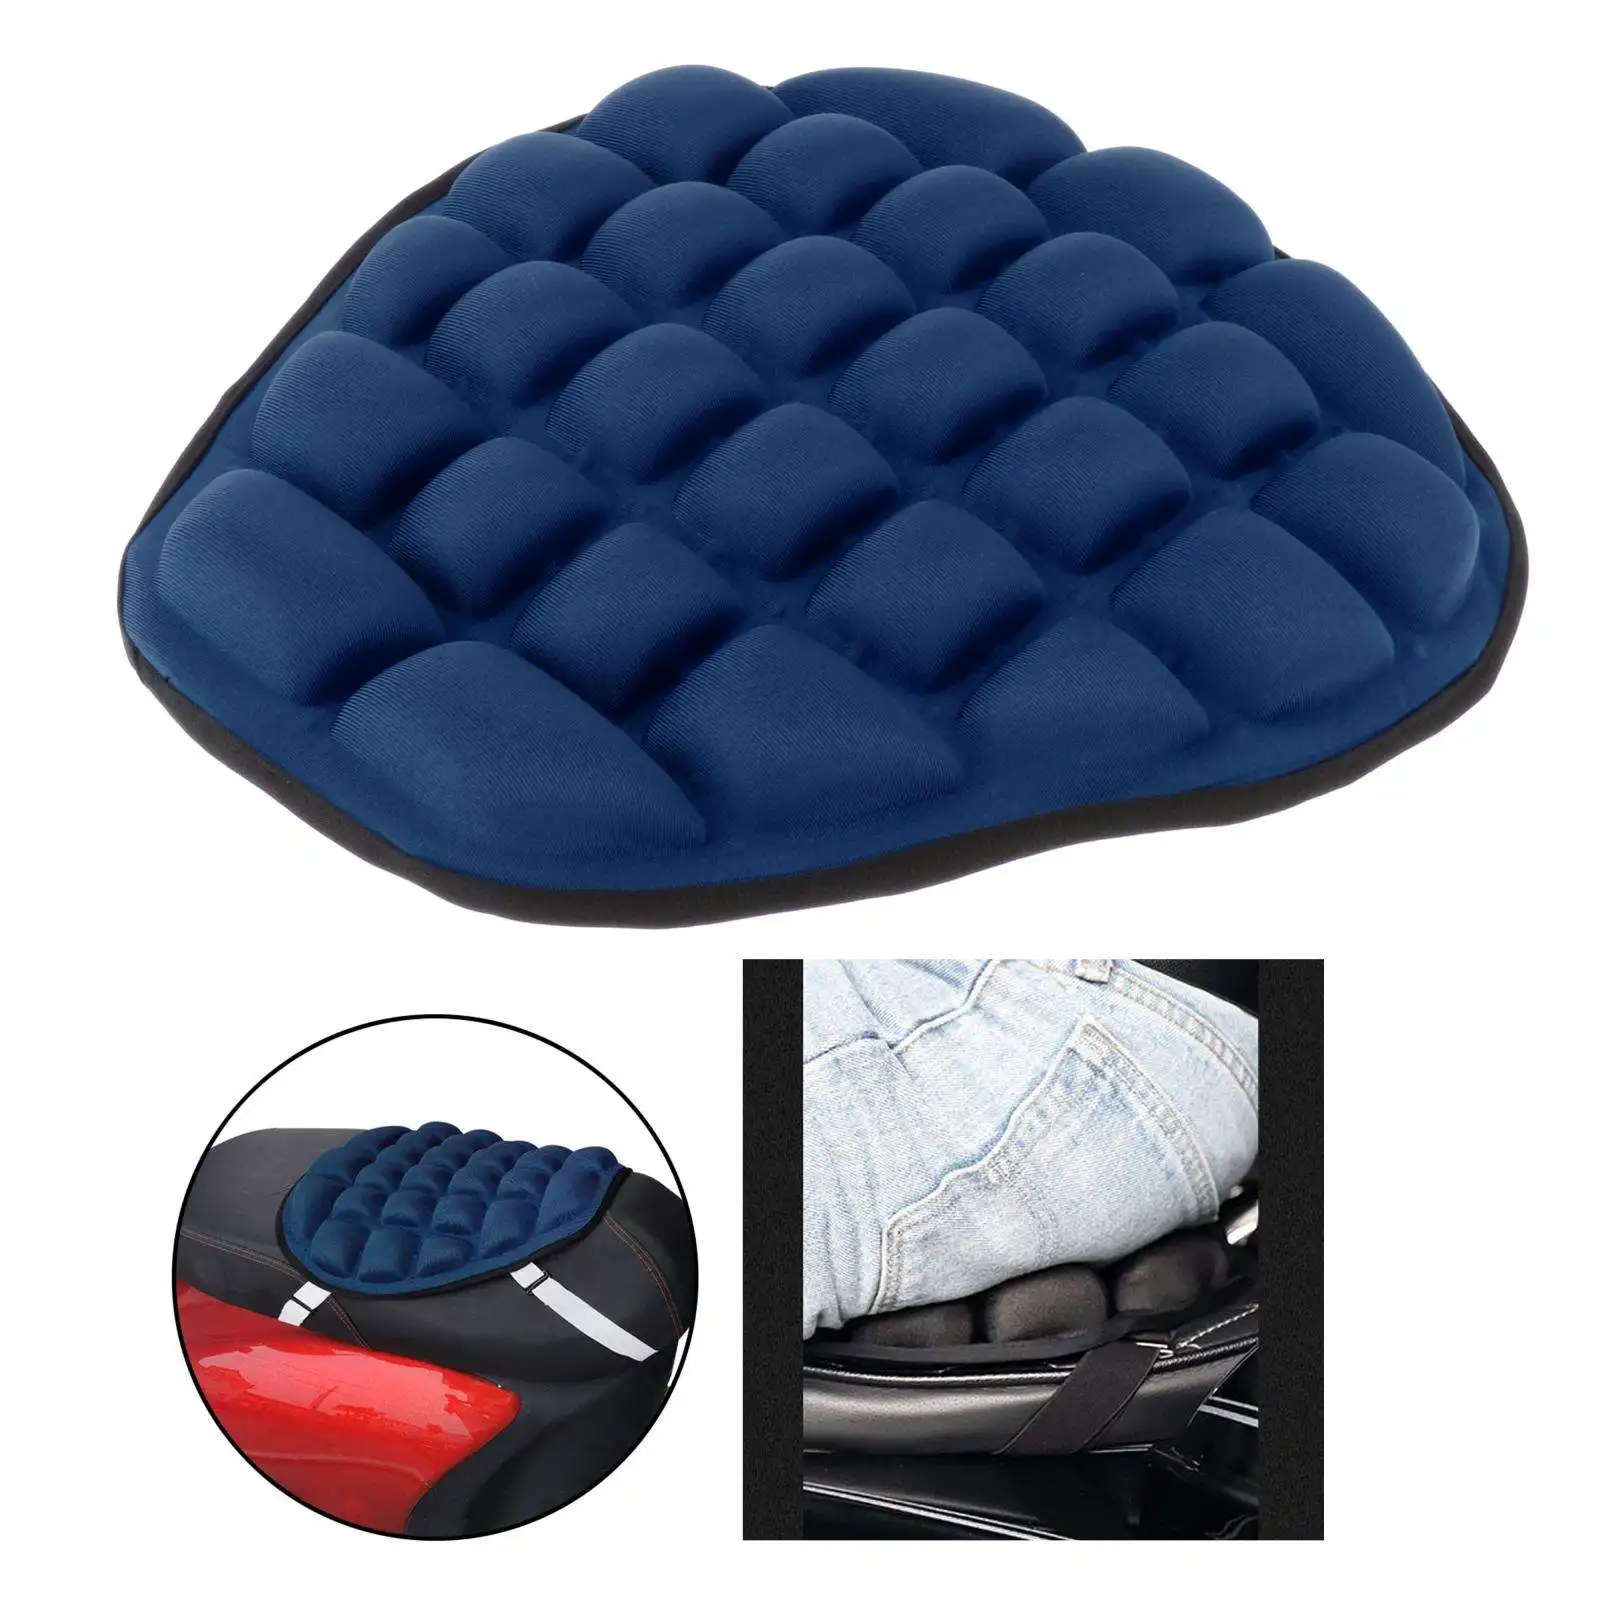 Air Pad Motorcycle Seat Cover Seat Sunscreen Mat Electric Car Decompression Office Air Cushion Gift